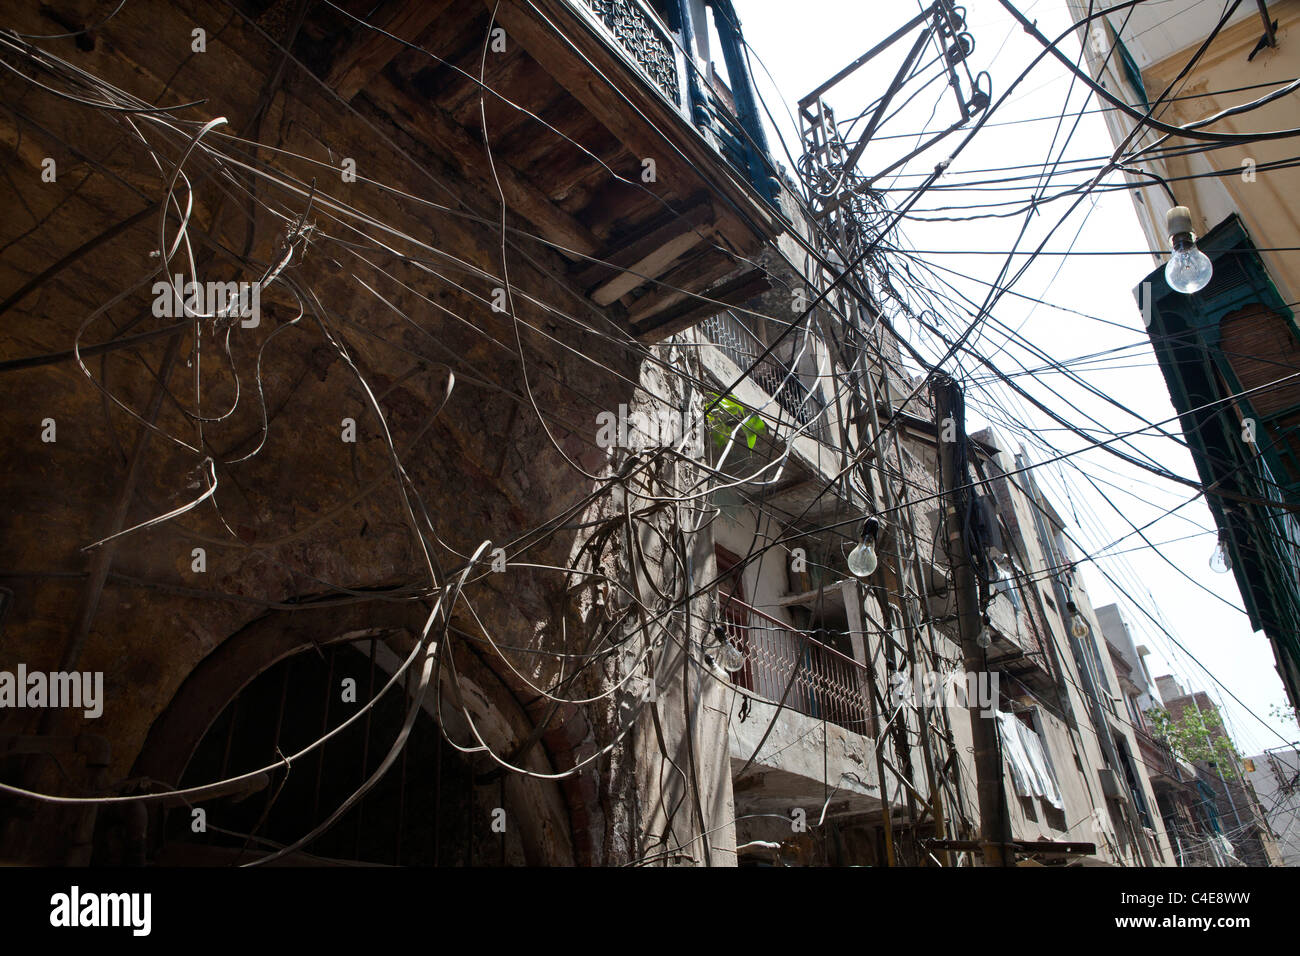 market in Lahoreelectricity wires in Lahore, Pakistan Stock Photo